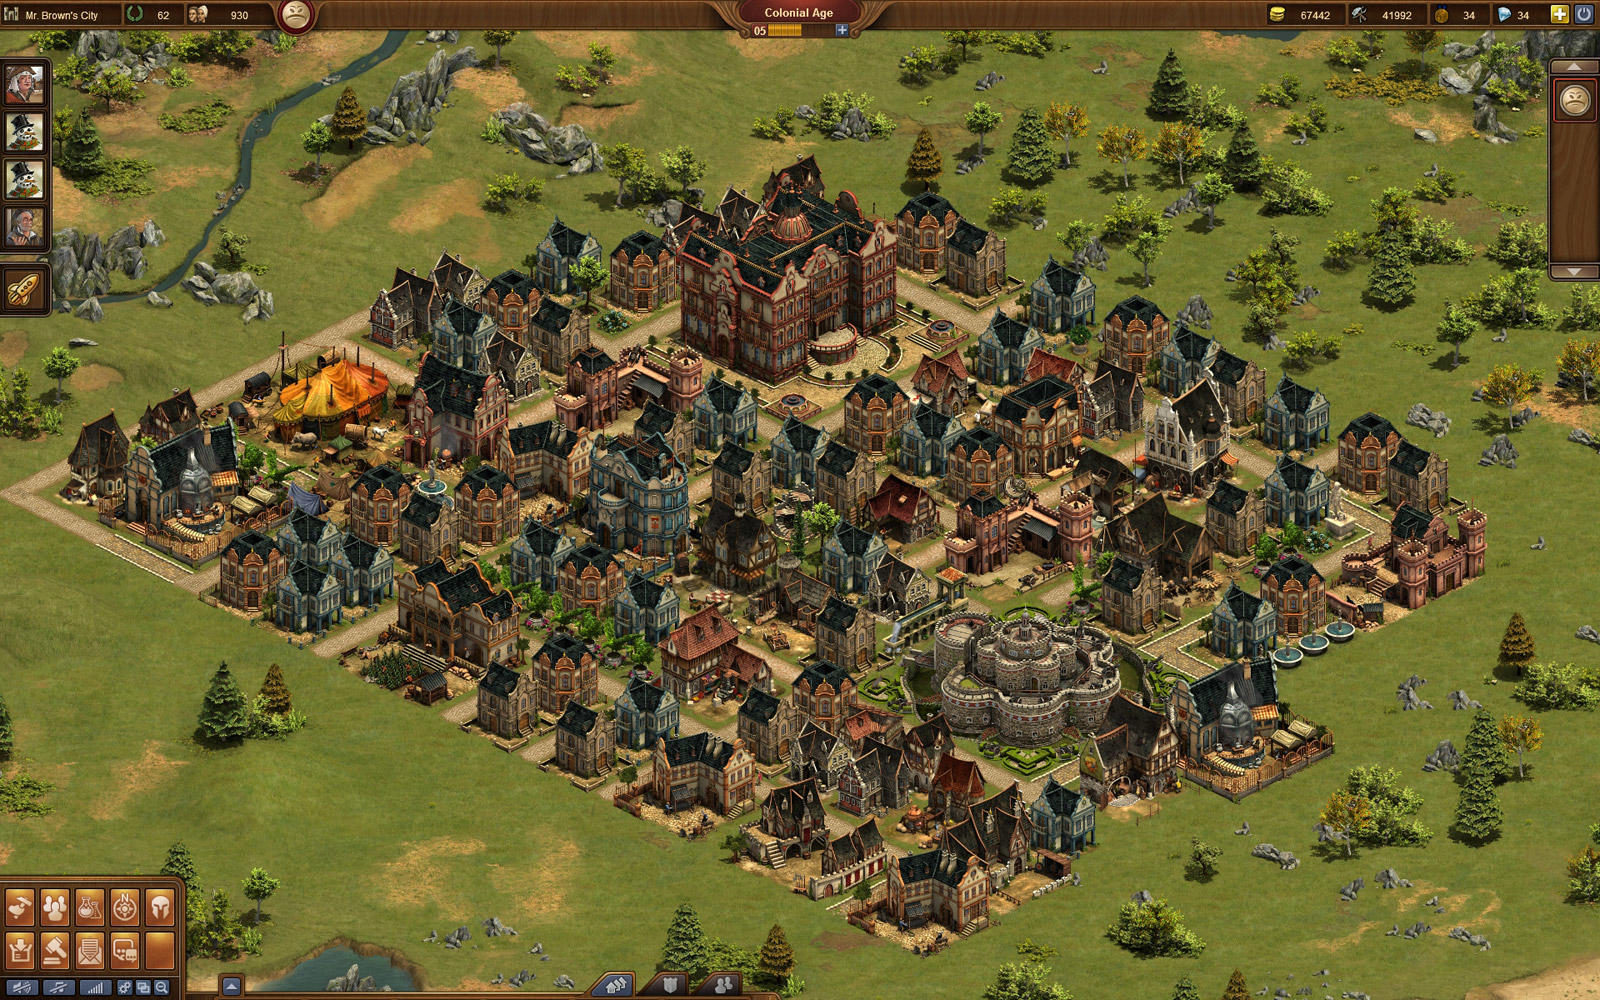 2019 forge of empires halloween buildings